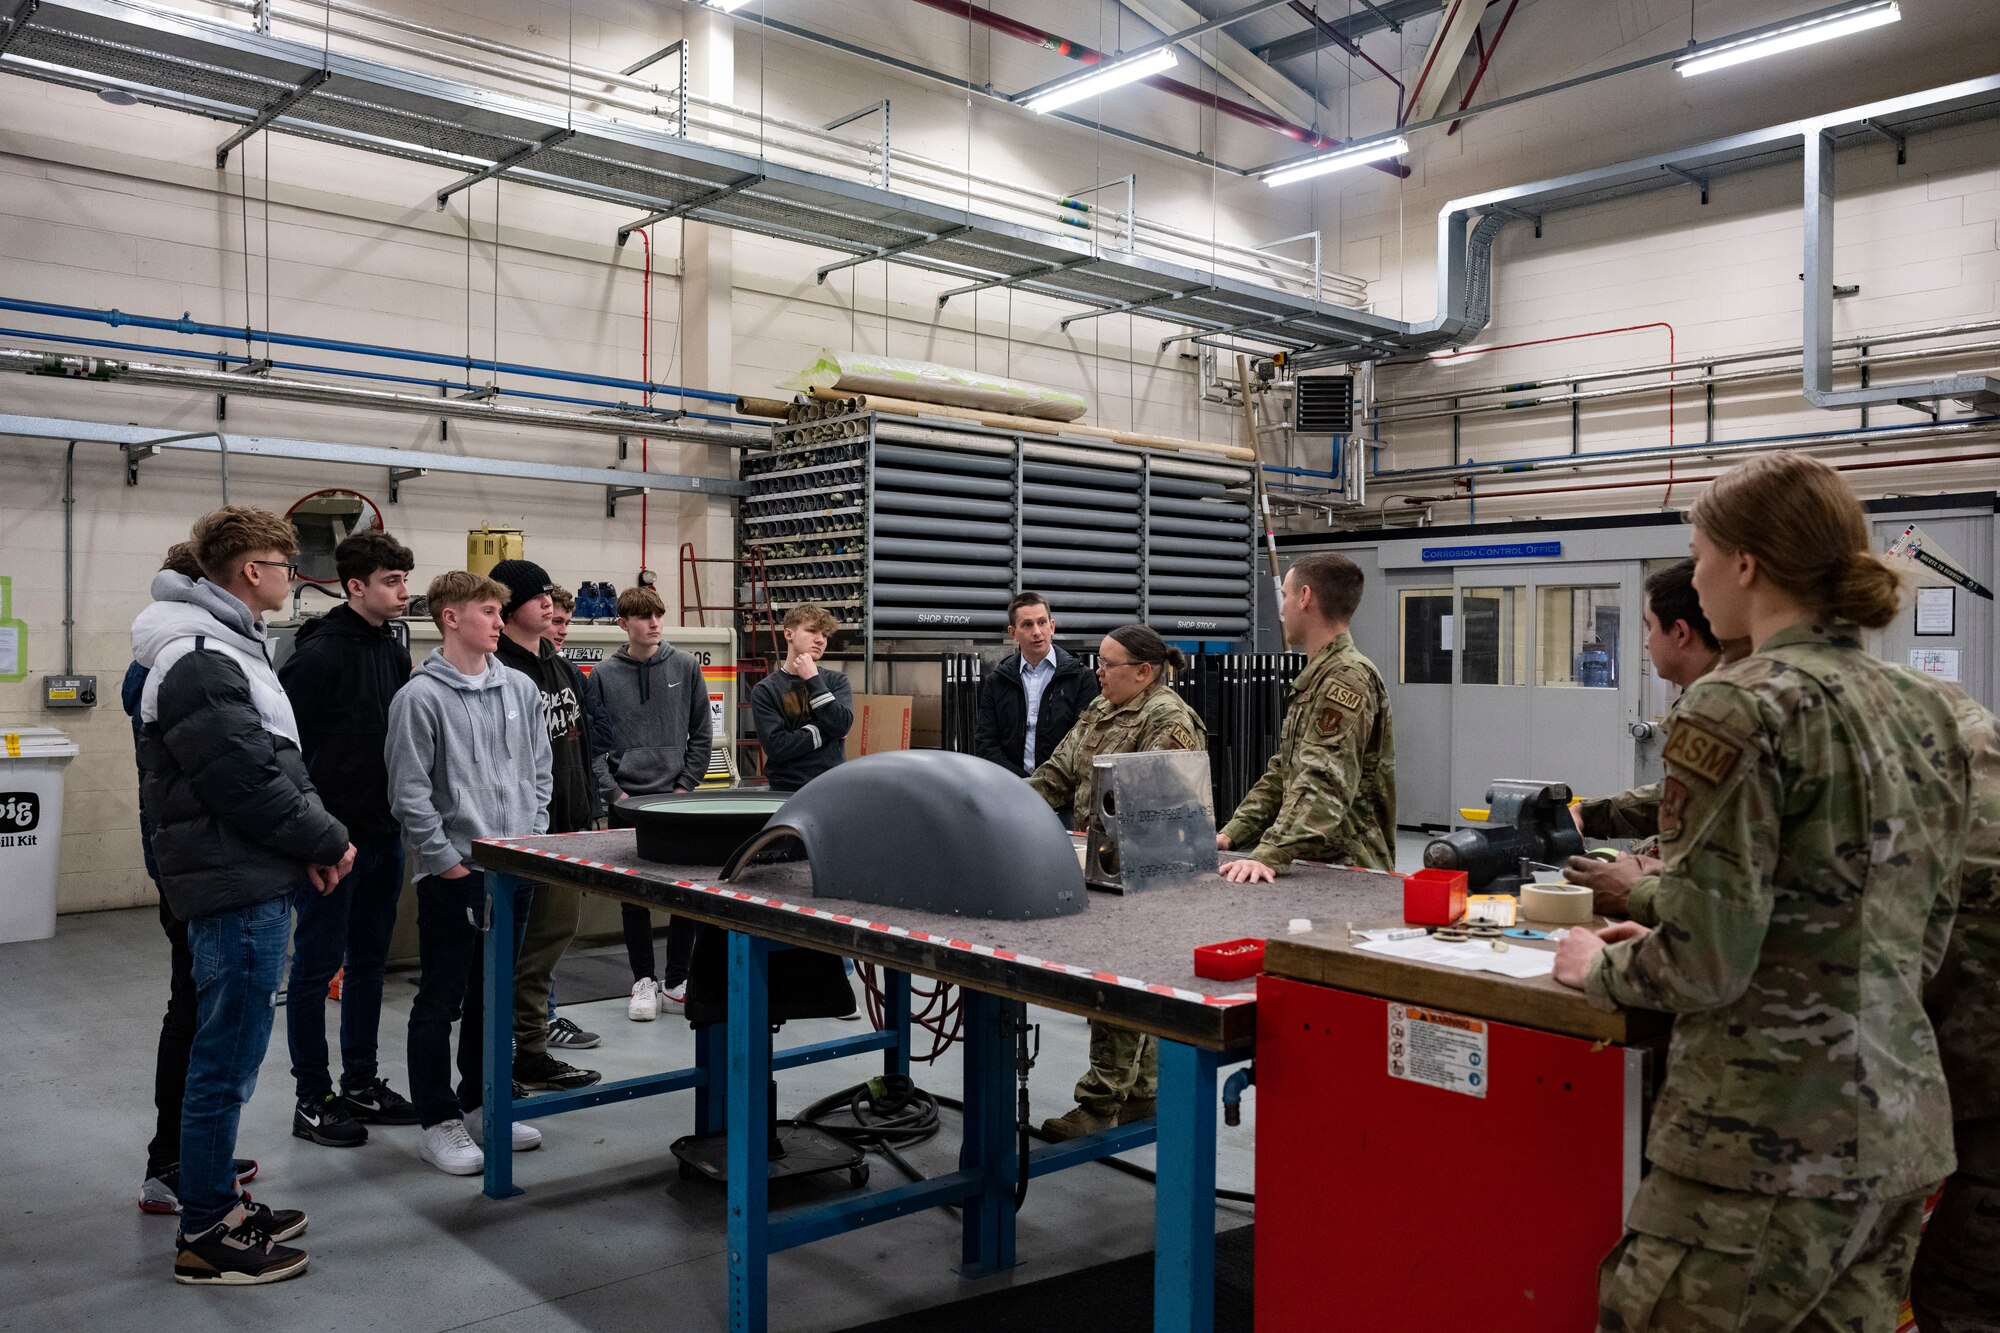 West Suffolk College students learned about the capabilities of the KC-135 Stratotanker aircraft assigned to the 100th Air Refueling Wing during the tour.